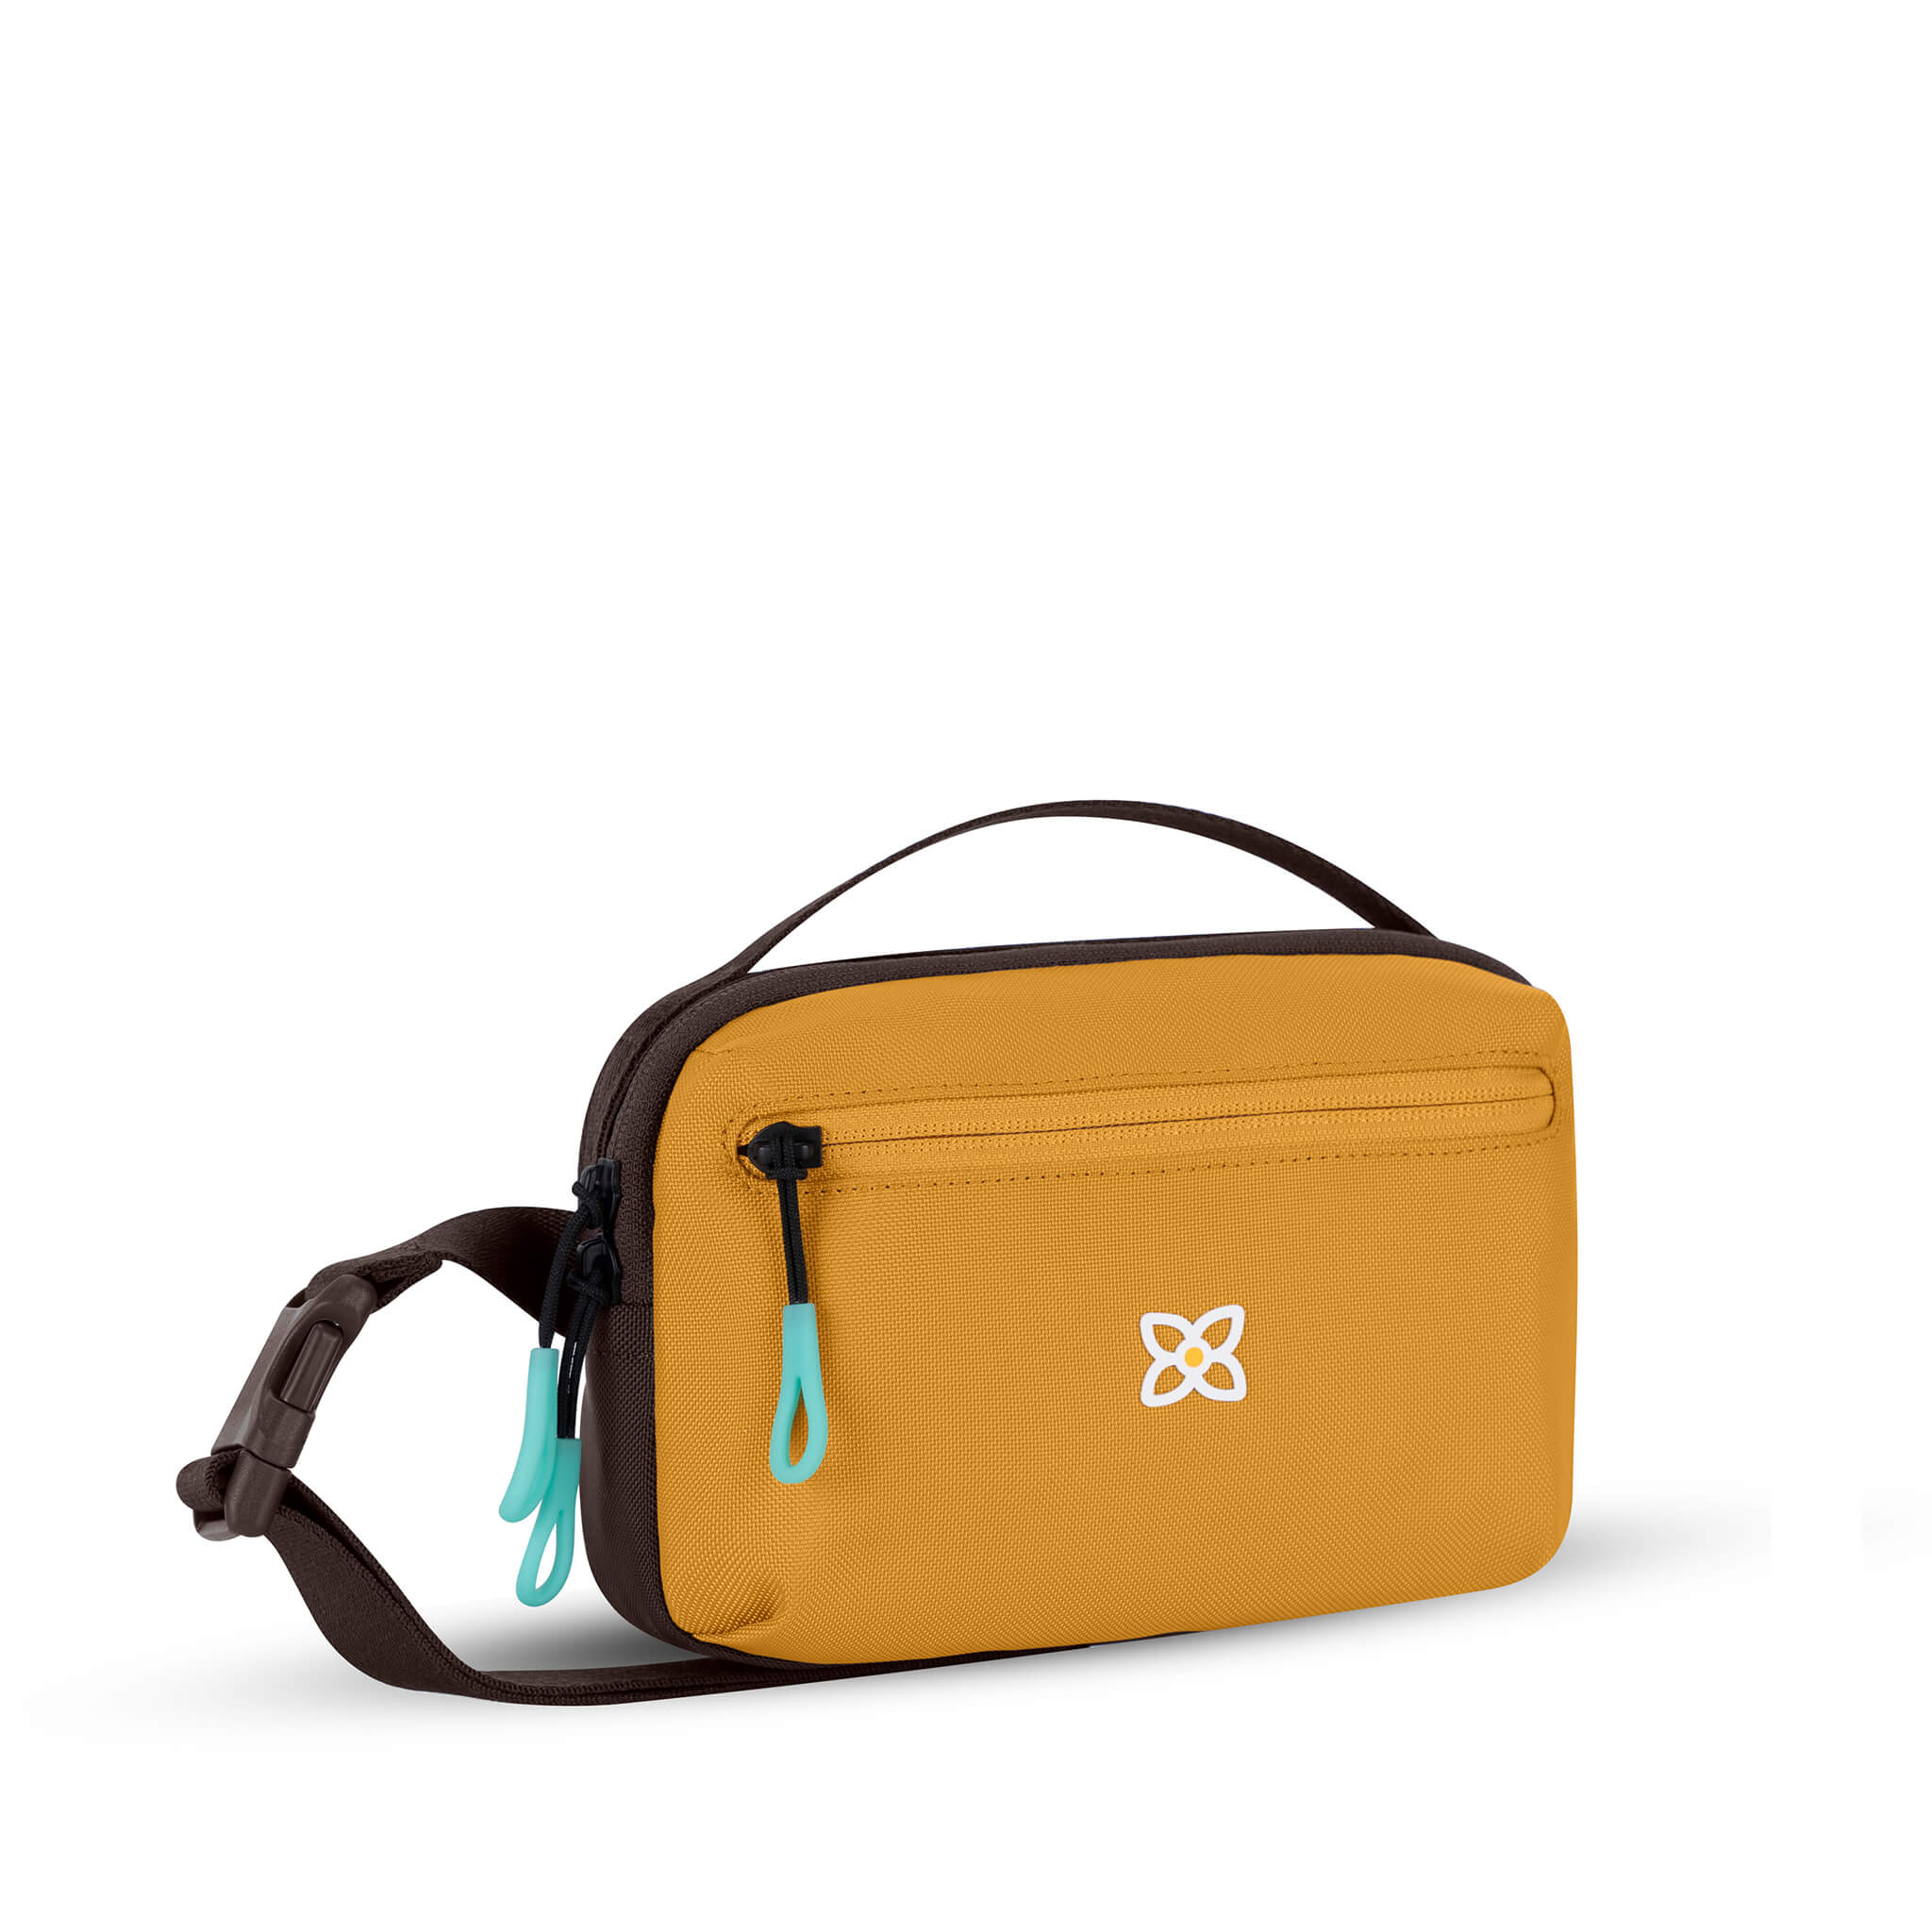 Angled front view of Sherpani hip pack, the Hyk in Sundial. Hyk features include an adjustable waist strap, two external zipper pockets, an internal zipper pocket and RFID-blocking technology to block cyber theft. The Sundial color is yellow with turquoise accents. #color_sundial